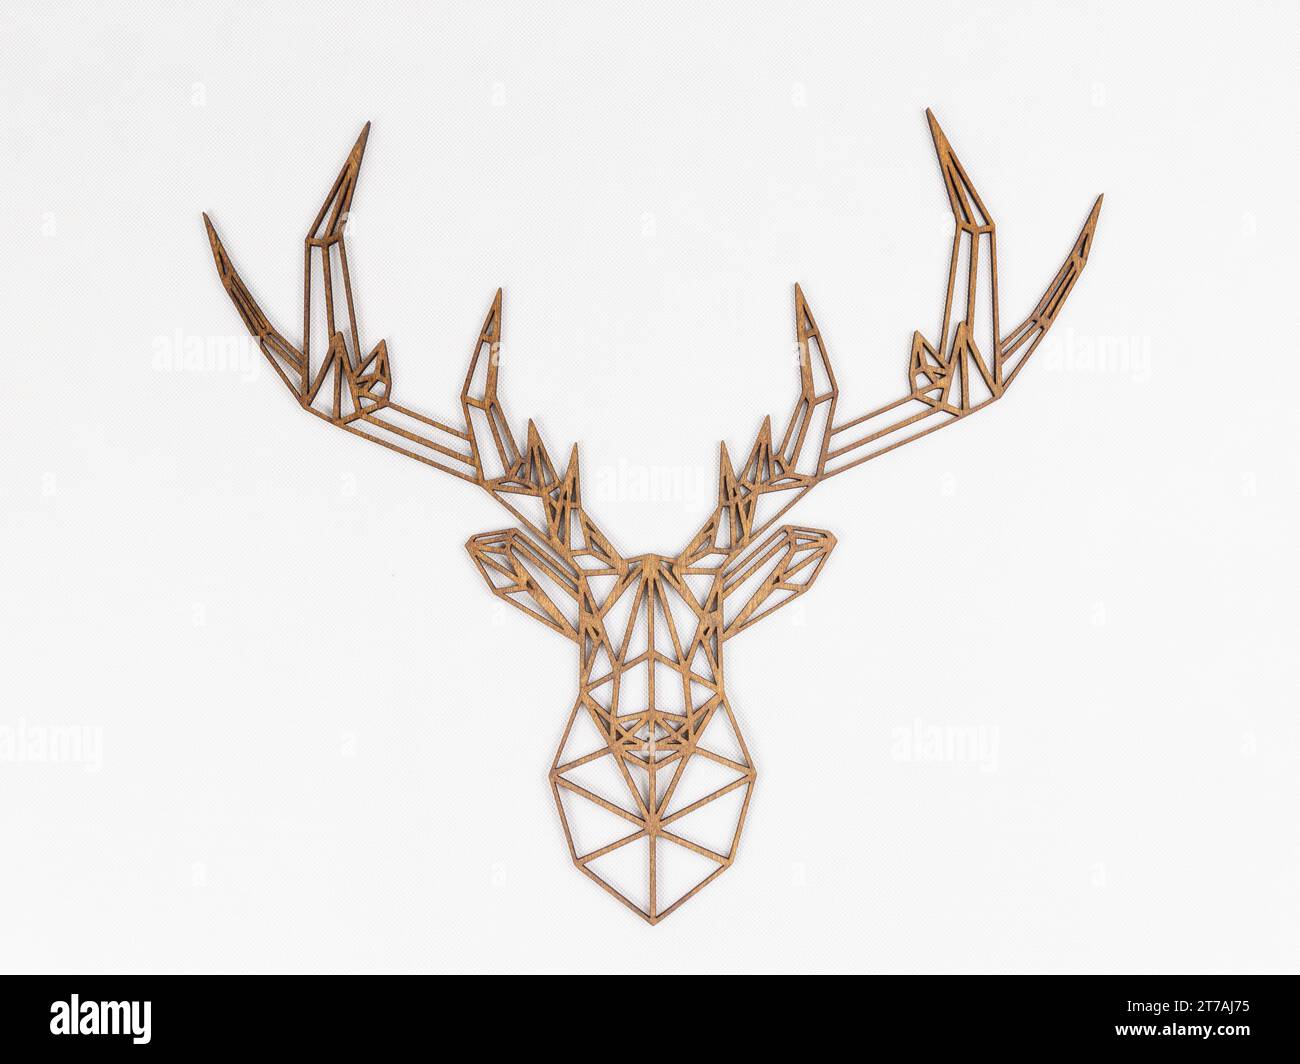 Geometric deer head sculpture made from Laser cut wood on a white background. Stock Photo